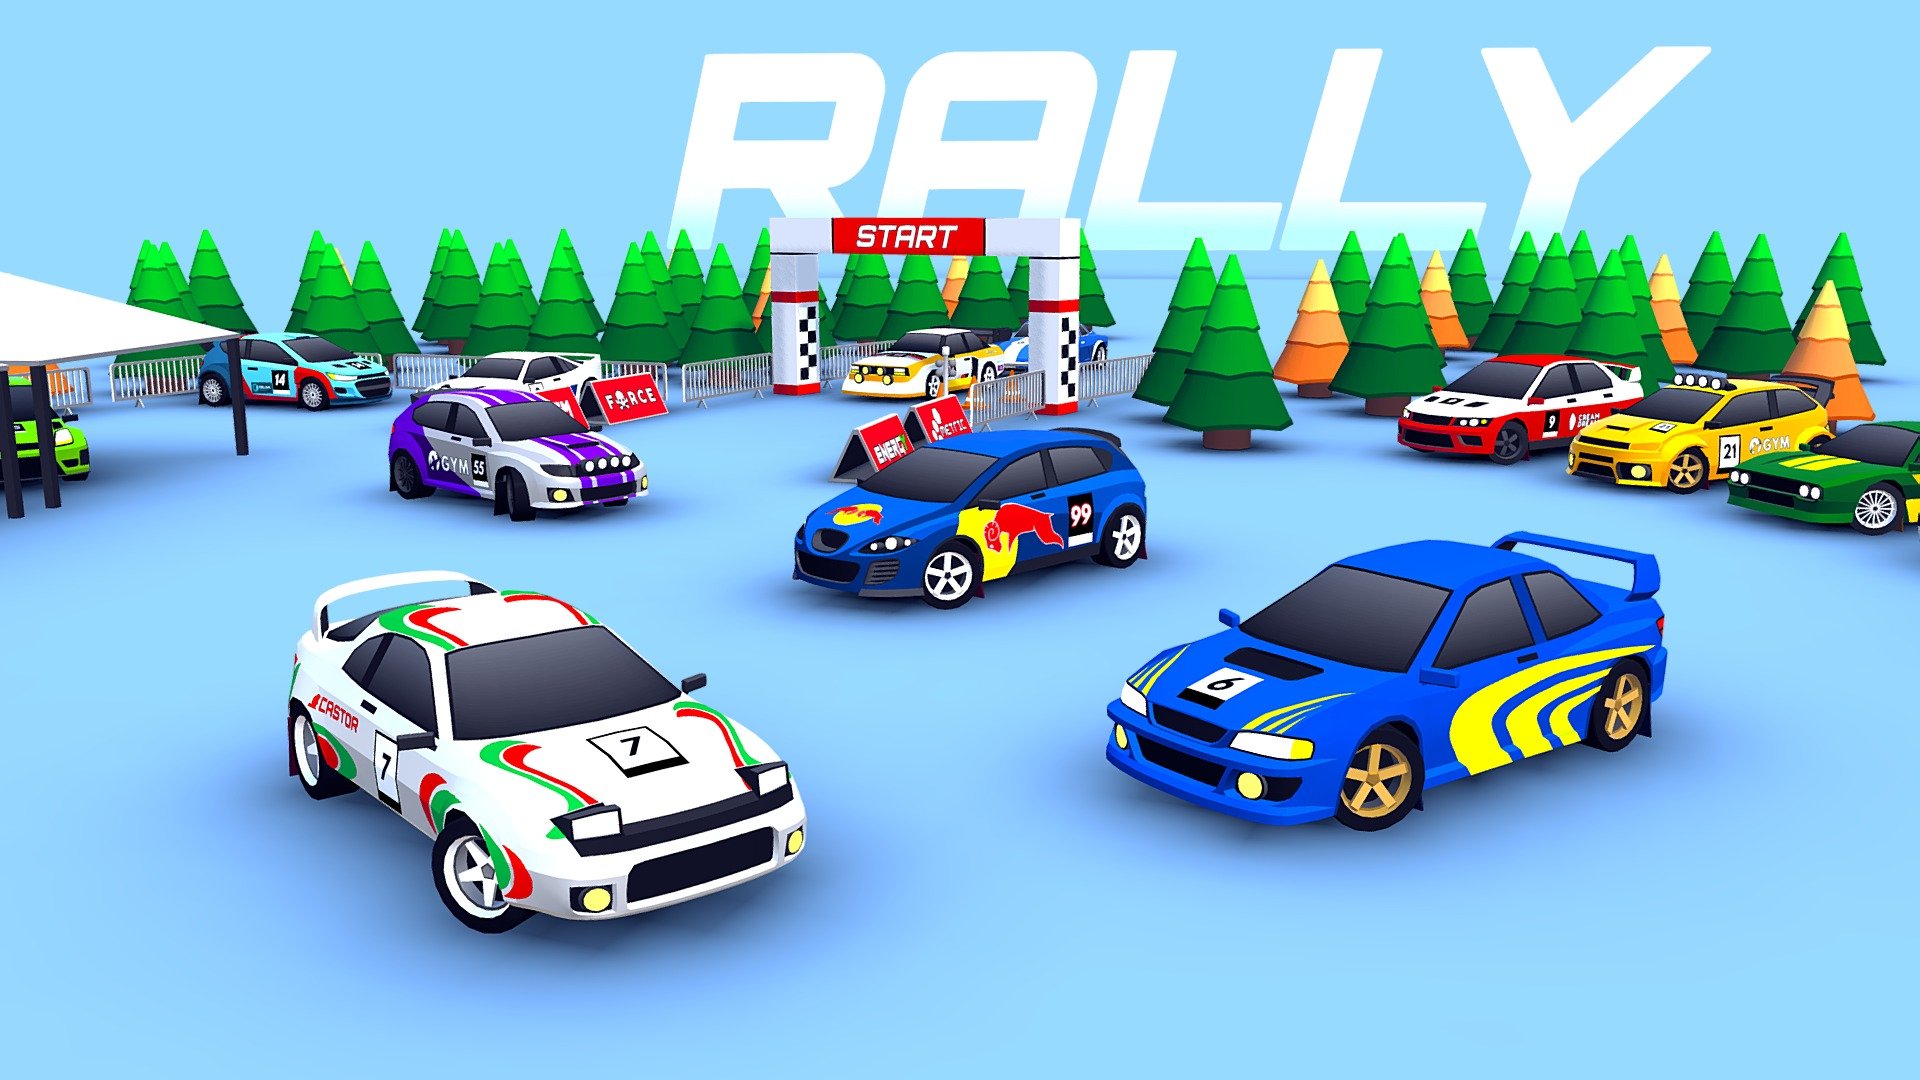 🏁 Put on your helmet, fasten your seatbelt and beat the best time on the track with these rally cars!

Detailed information:




It contains 17 RALLY CARS.

5 colors for each car (85 vehicle variations).

Vehicles use 3 materials.

Texture atlas: 1024px * 1024px.

Polygon count: 3400 - 4800 triangles per vehicle.

It works with any car controller.

FBX and UNITY 3D Files included.

This asset also includes the following extras: Mountains, cones, advertisements, canopy tent, start line and skyboxes.



 - ARCADE: Rally Cars - Buy Royalty Free 3D model by Mena (@MenaStudios) 3d model